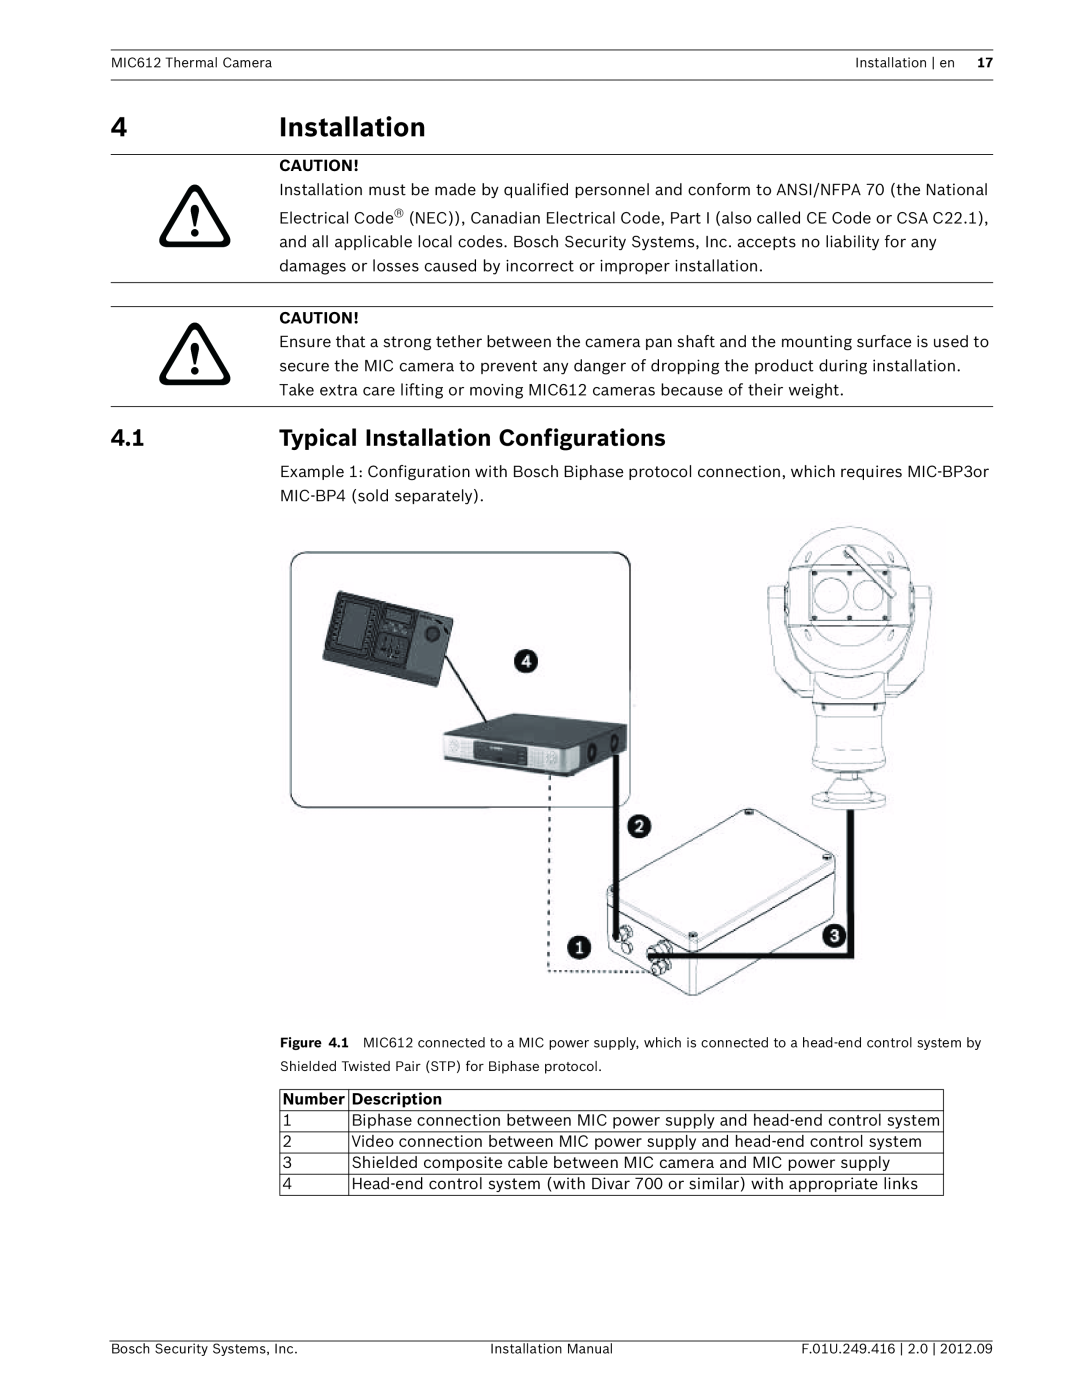 Bosch Appliances MIC612 installation manual Typical Installation Configurations 